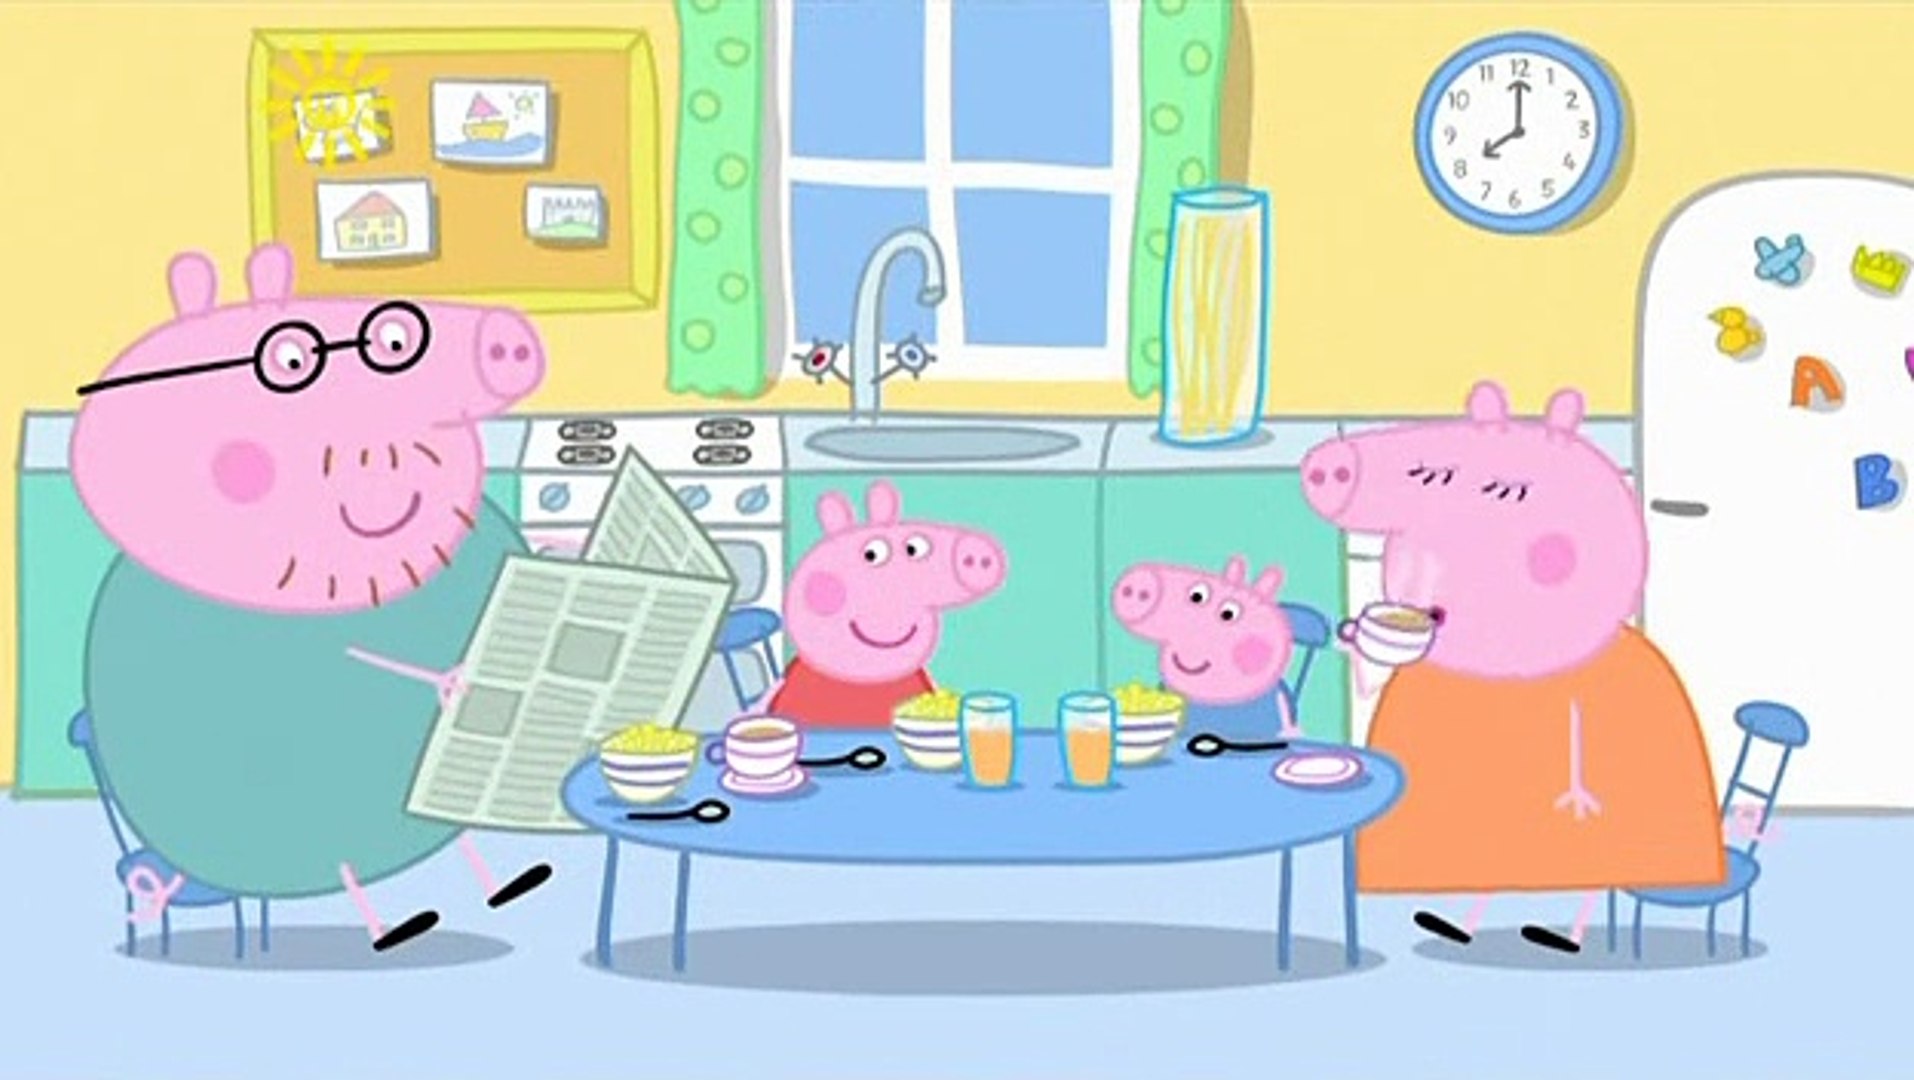 Peppa Pig. Baby Alexander. Mummy Pig and Daddy Pig and George Pig